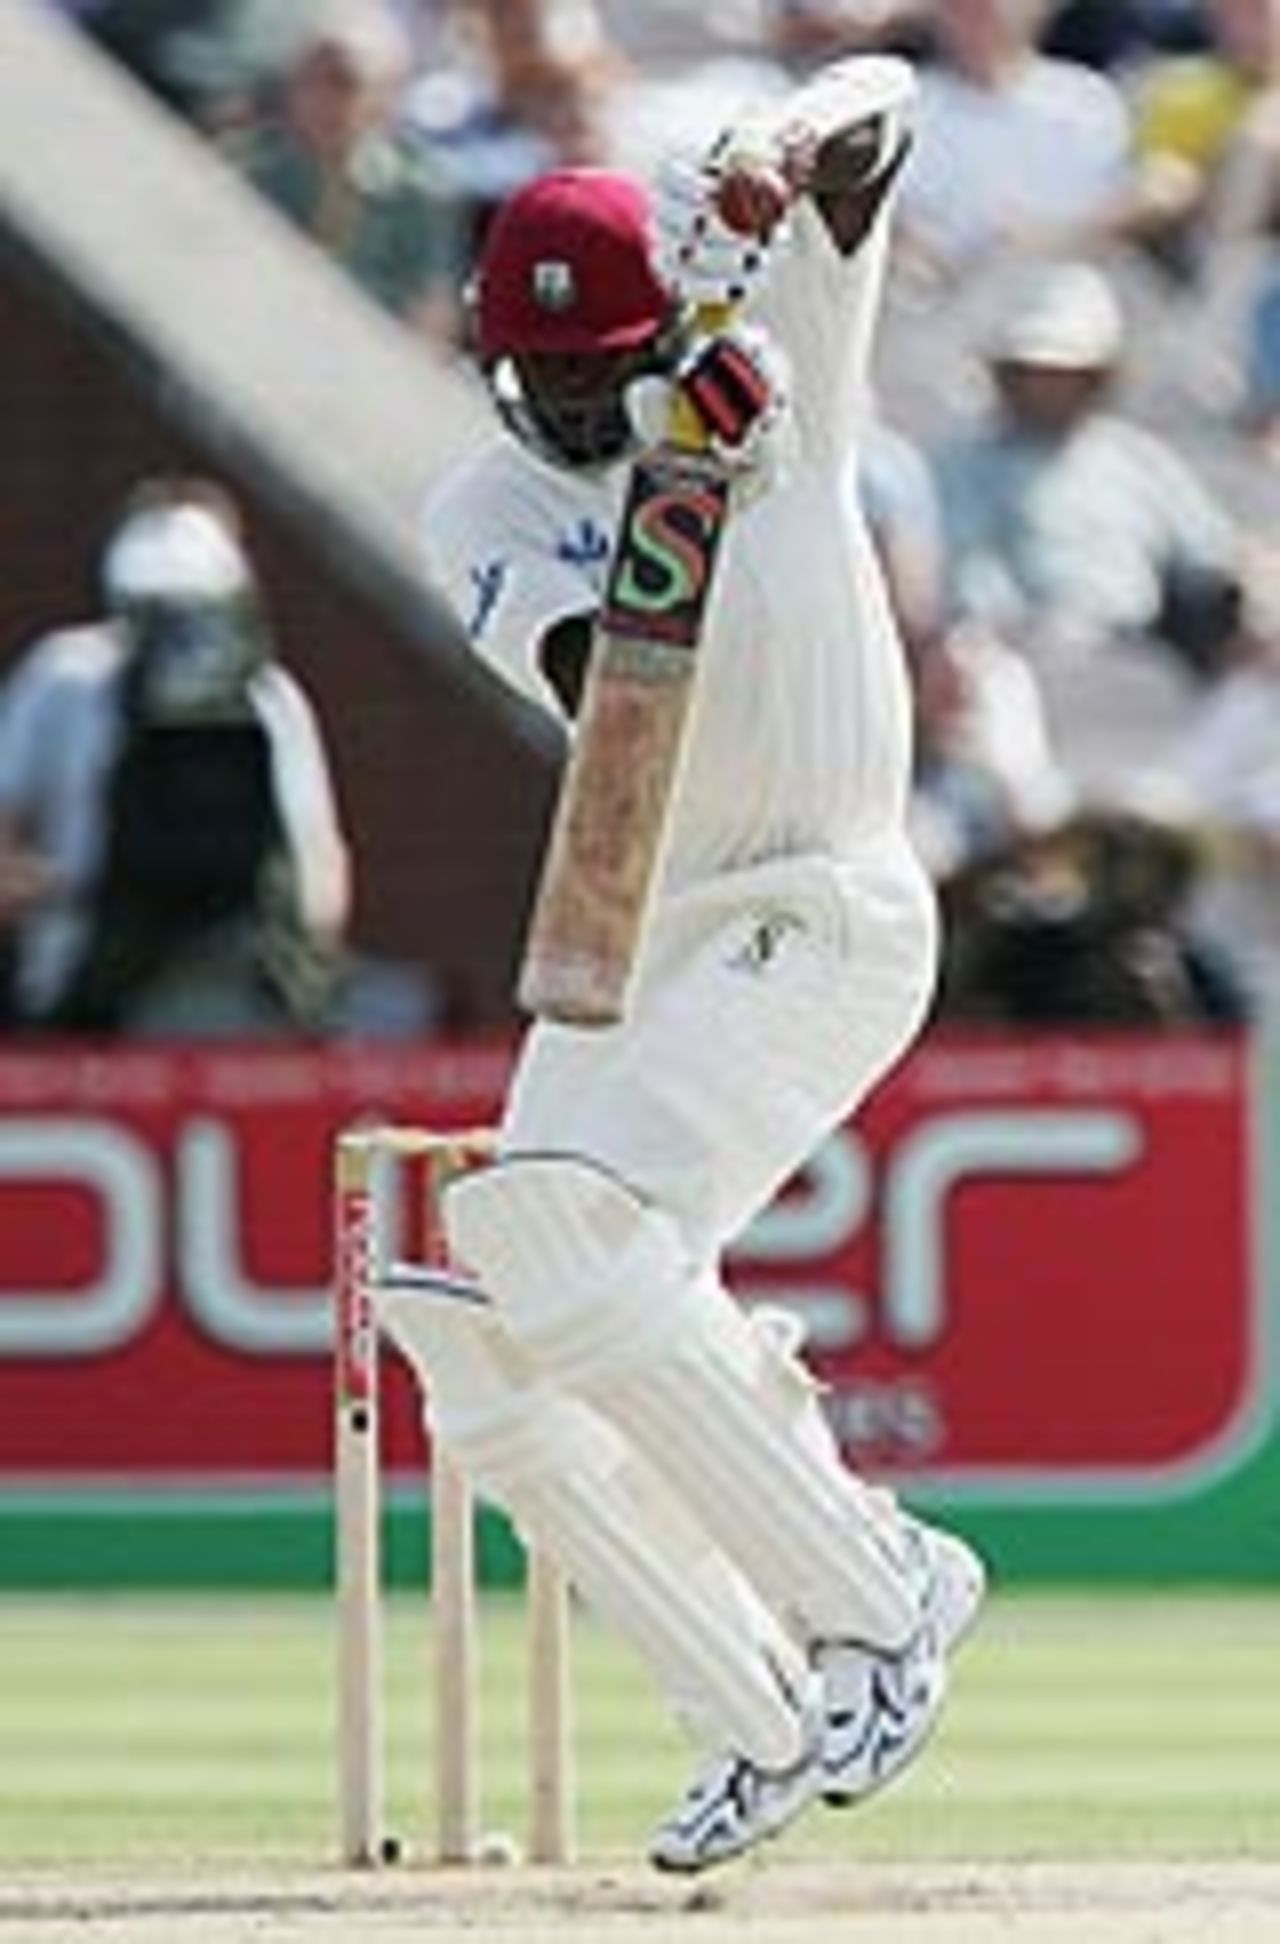 Pedro Collins was the final wicket to fall, as England were set 231 for victory at Old Trafford, August 16, 2004